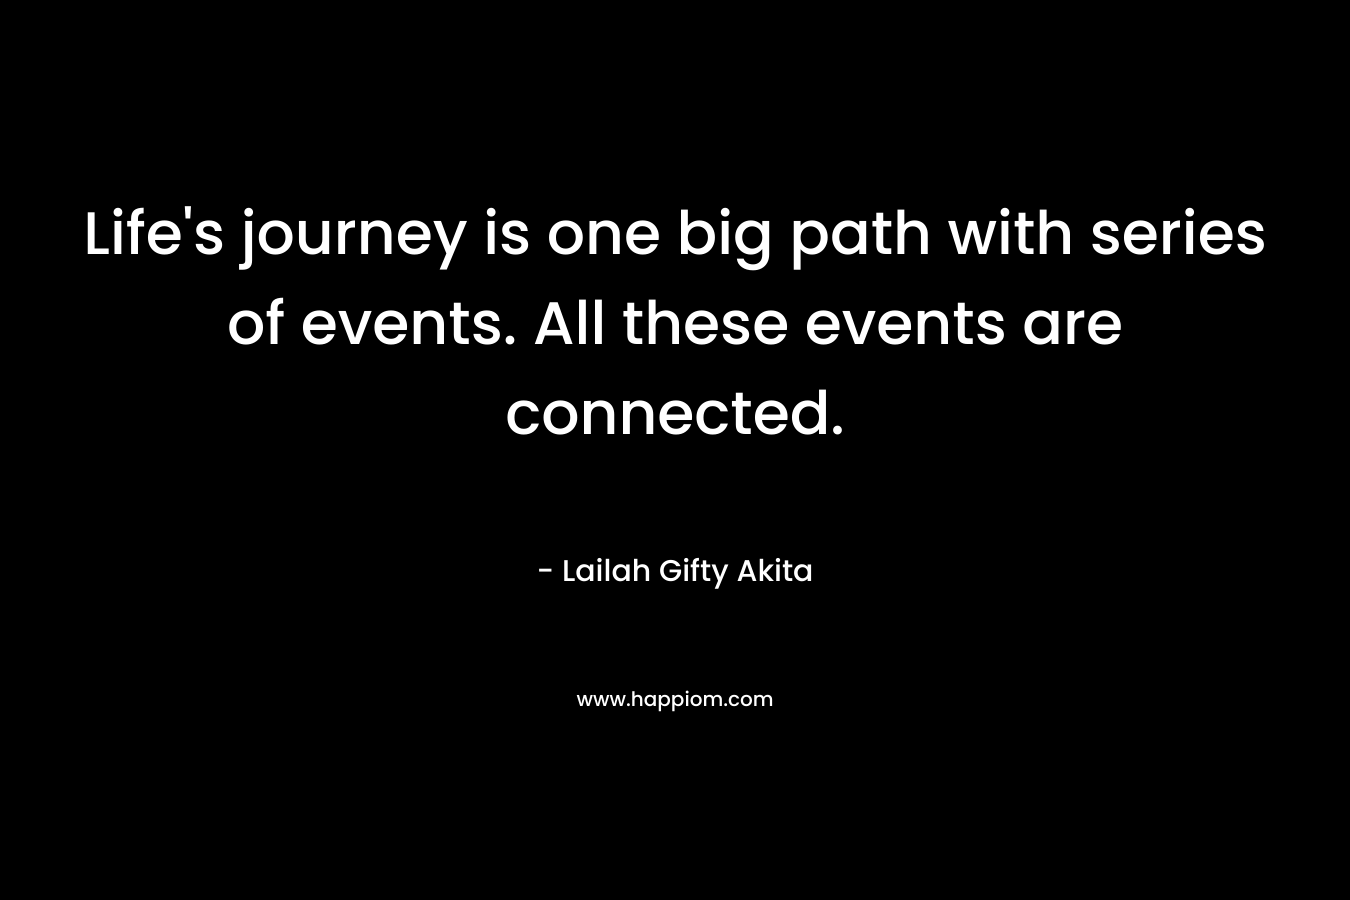 Life's journey is one big path with series of events. All these events are connected.